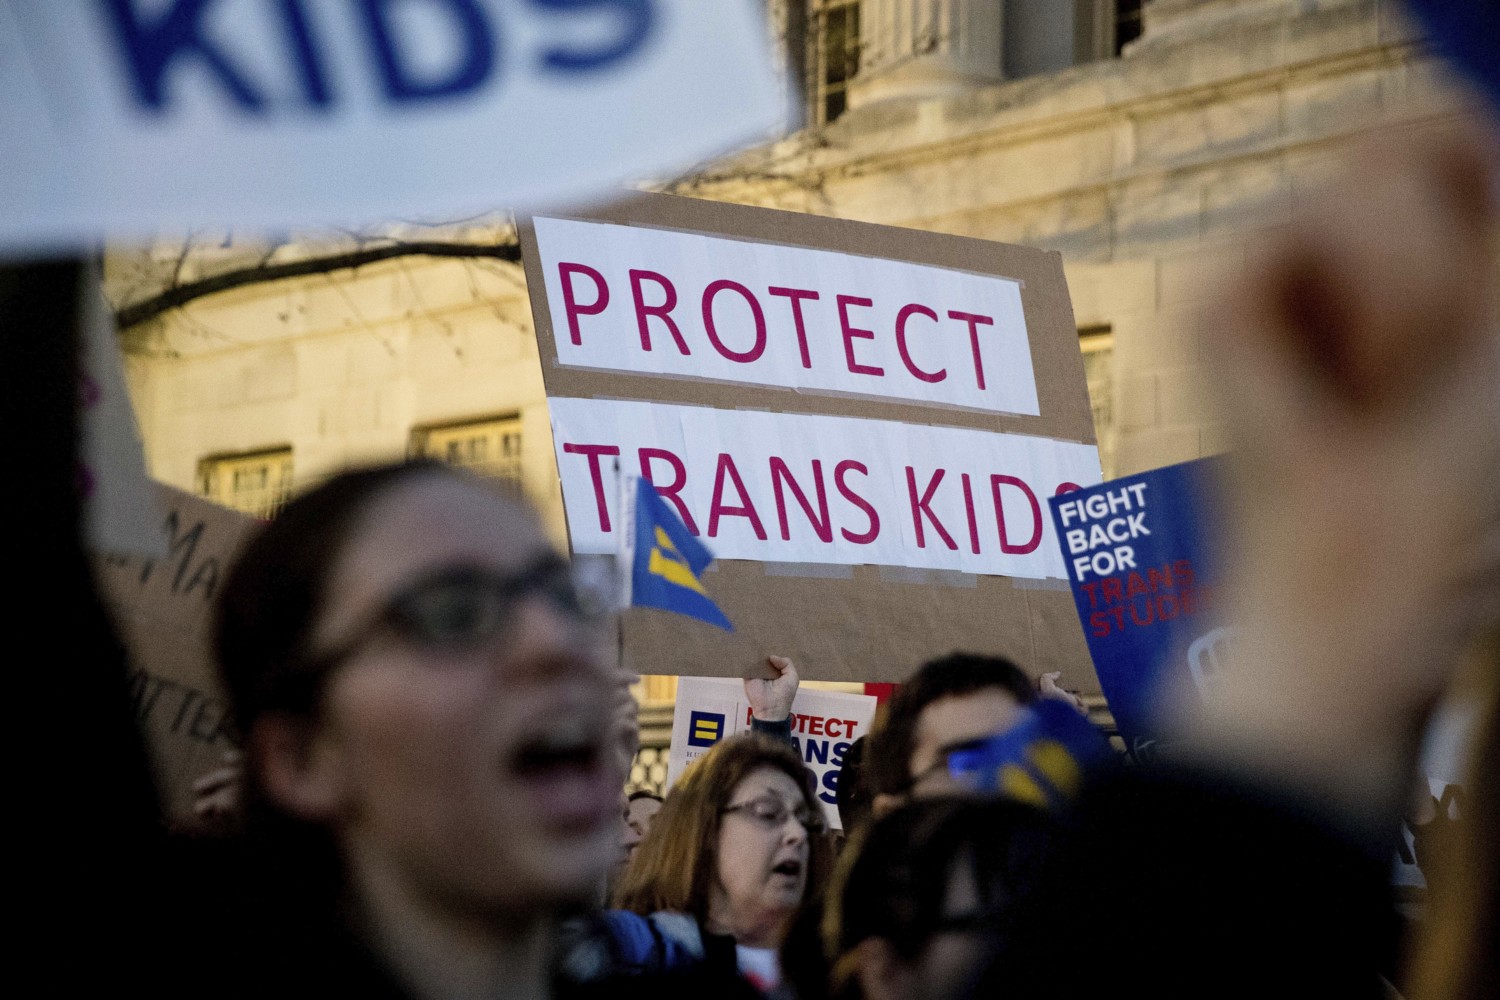 Protect Trans Kids sign at Protest for Transgender Rights in 2017